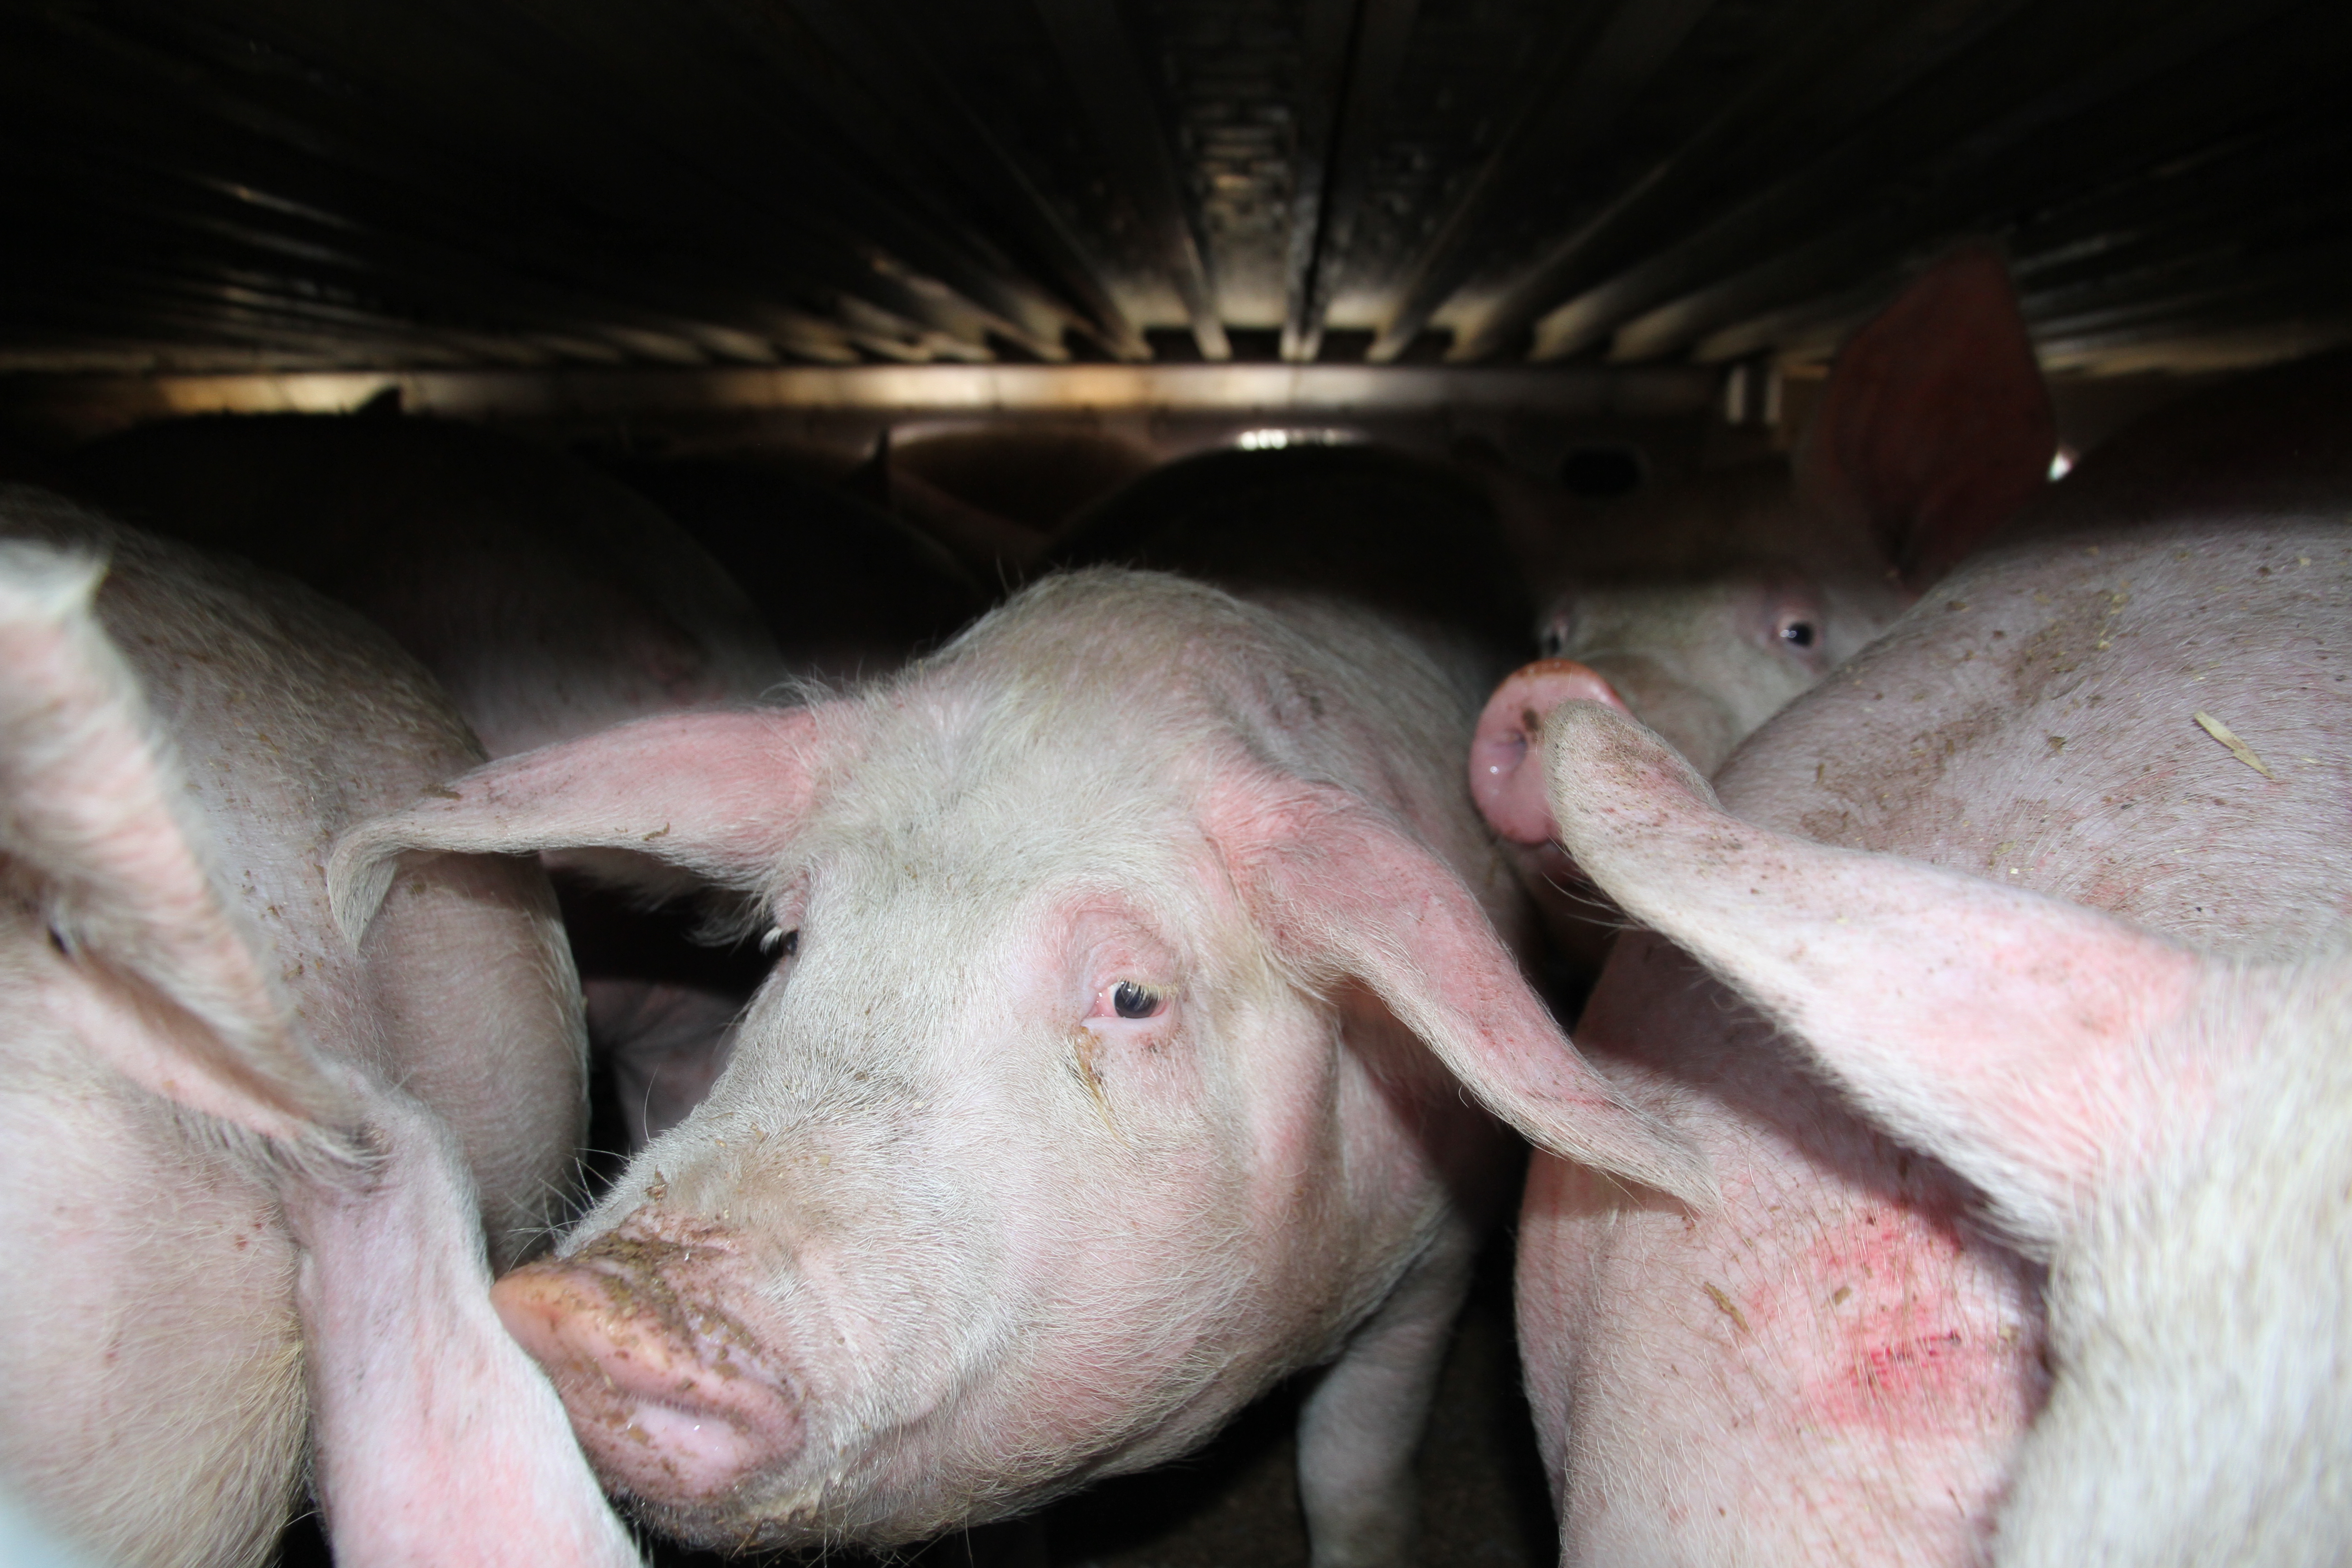 Confrontation at Quality Meat Packers over frost-bitten pigs